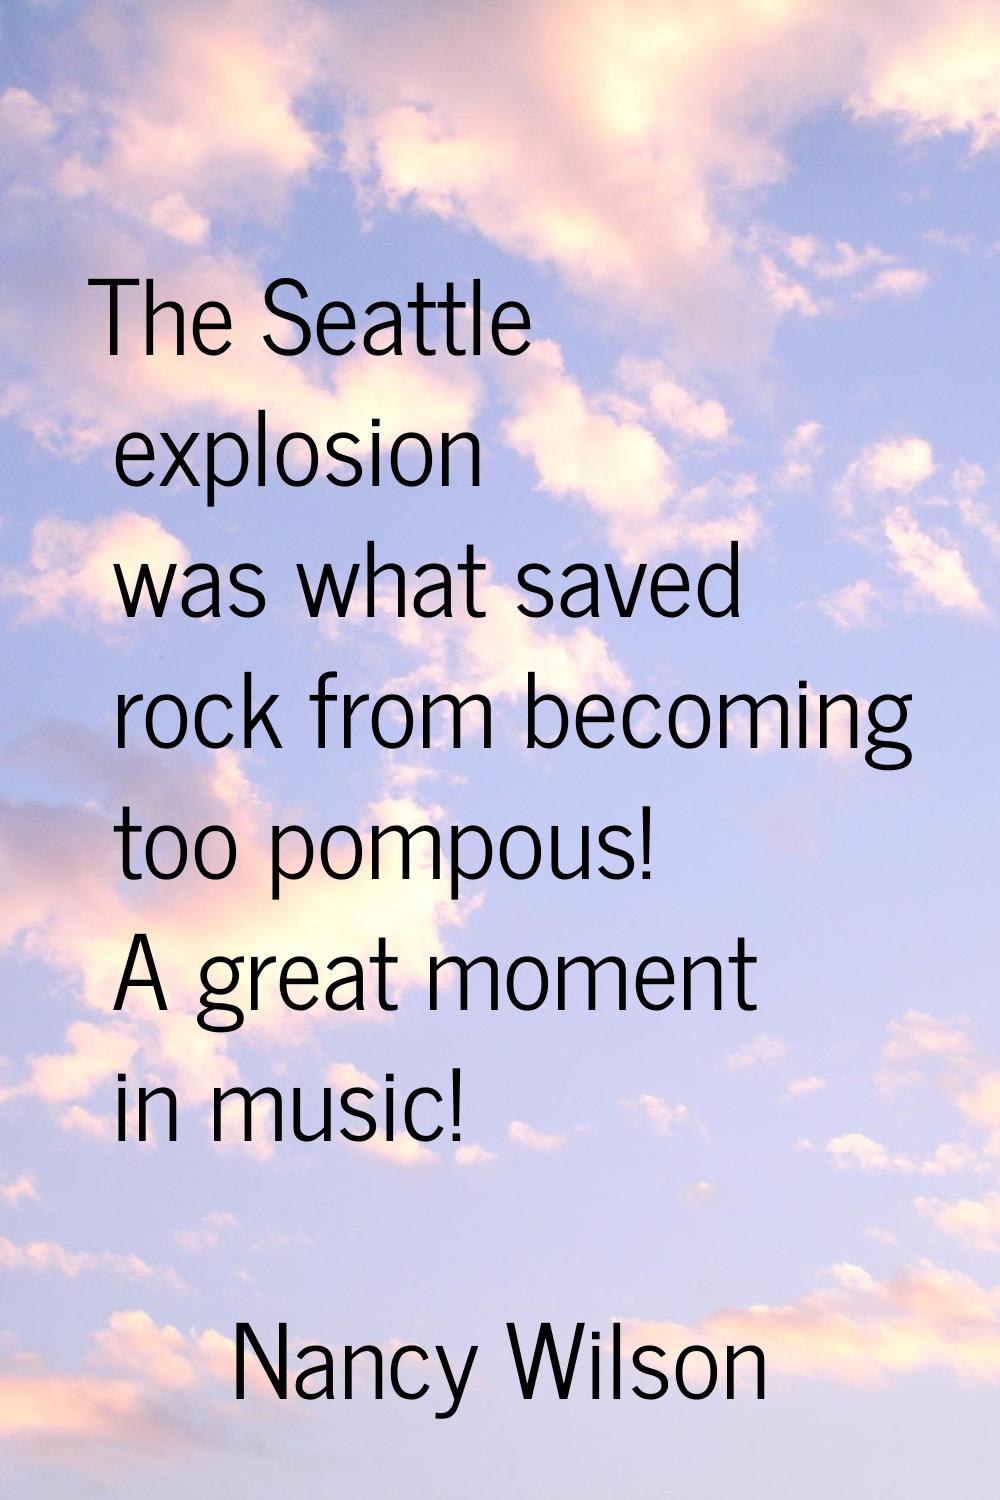 The Seattle explosion was what saved rock from becoming too pompous! A great moment in music!